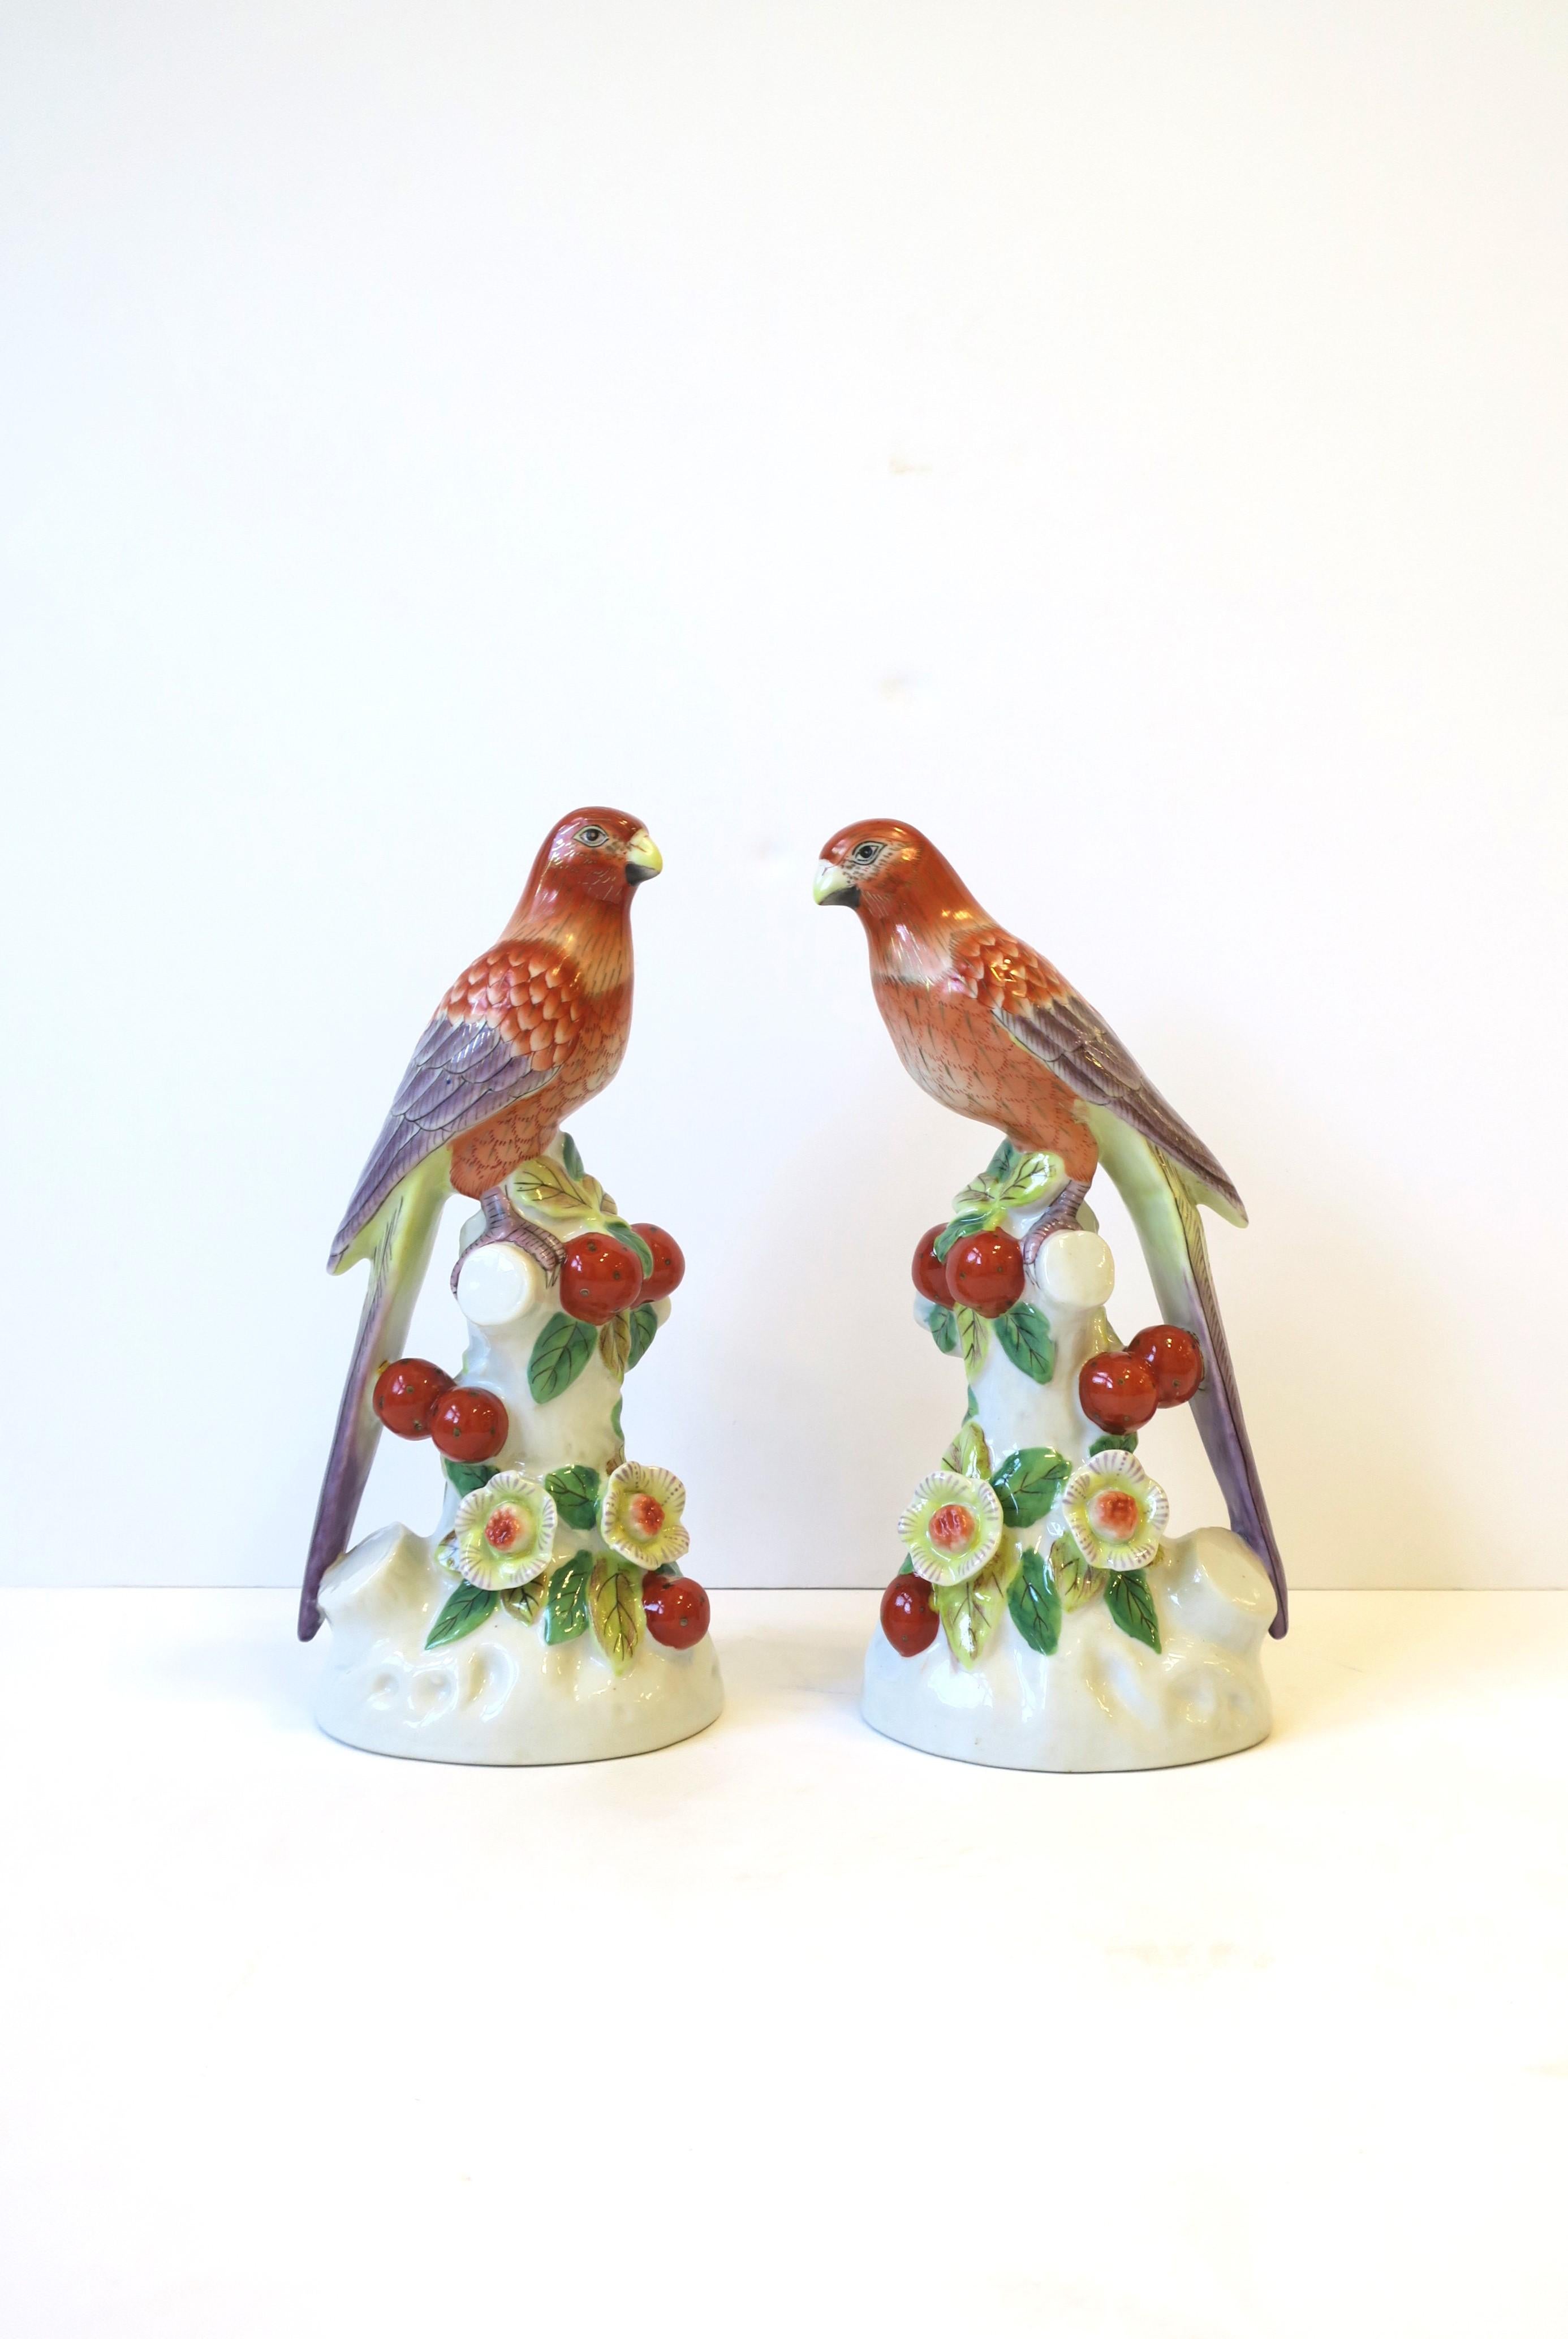 A pair of ceramic bird's decorative objects perched on branch, circa late-20th century. Beautiful birds with long tails, perched on branch, with flowers and berries. Colors include orange, purple, gold, light green, green, and red. Each bird is